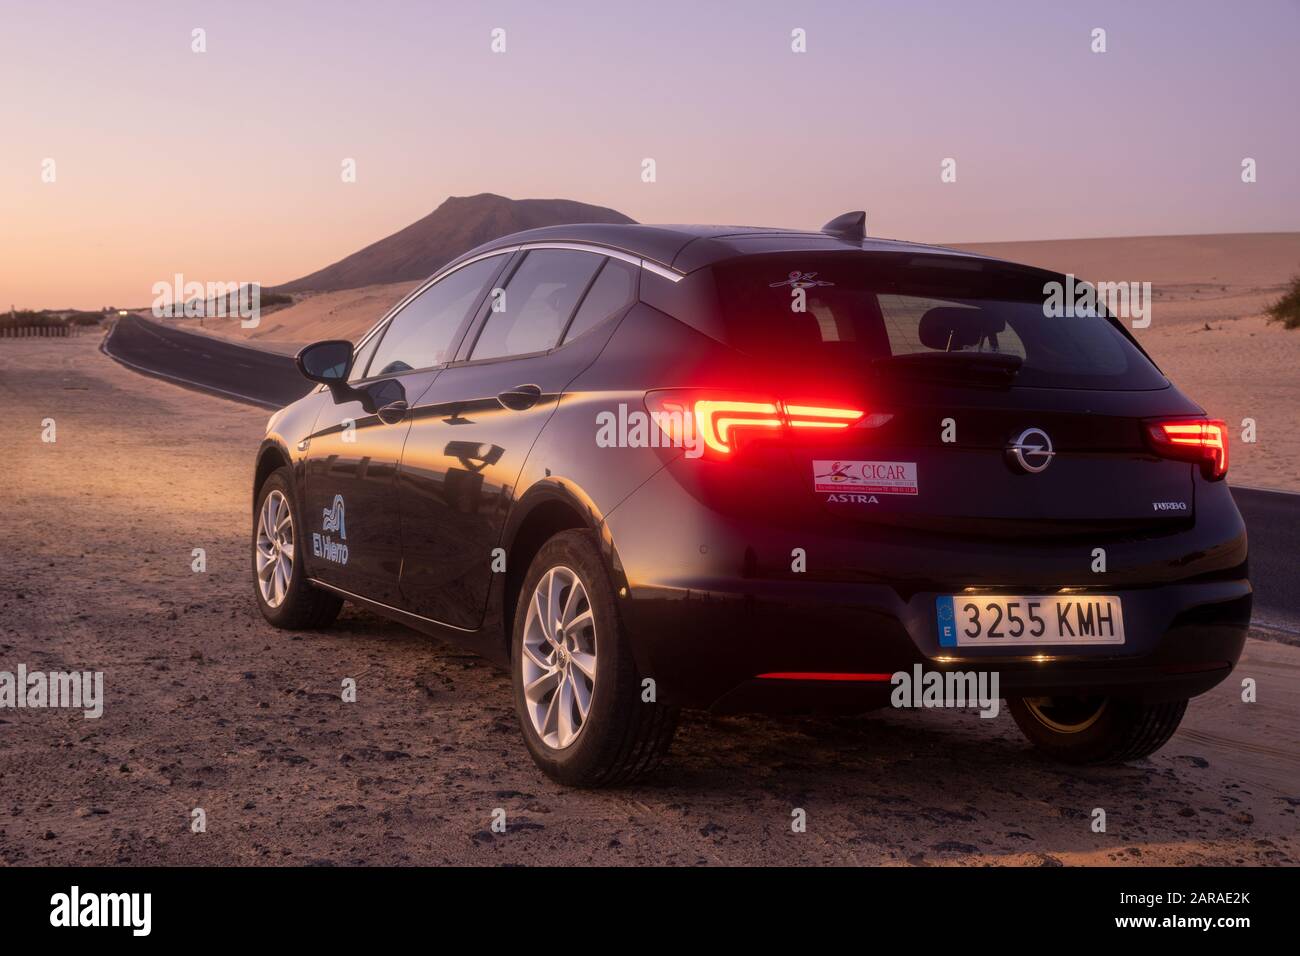 Opel Astra Turbo Belongs to the Cicar car rental company by the road through the dunes - Canary Islands, Fuerteventura - January 2020 Stock Photo